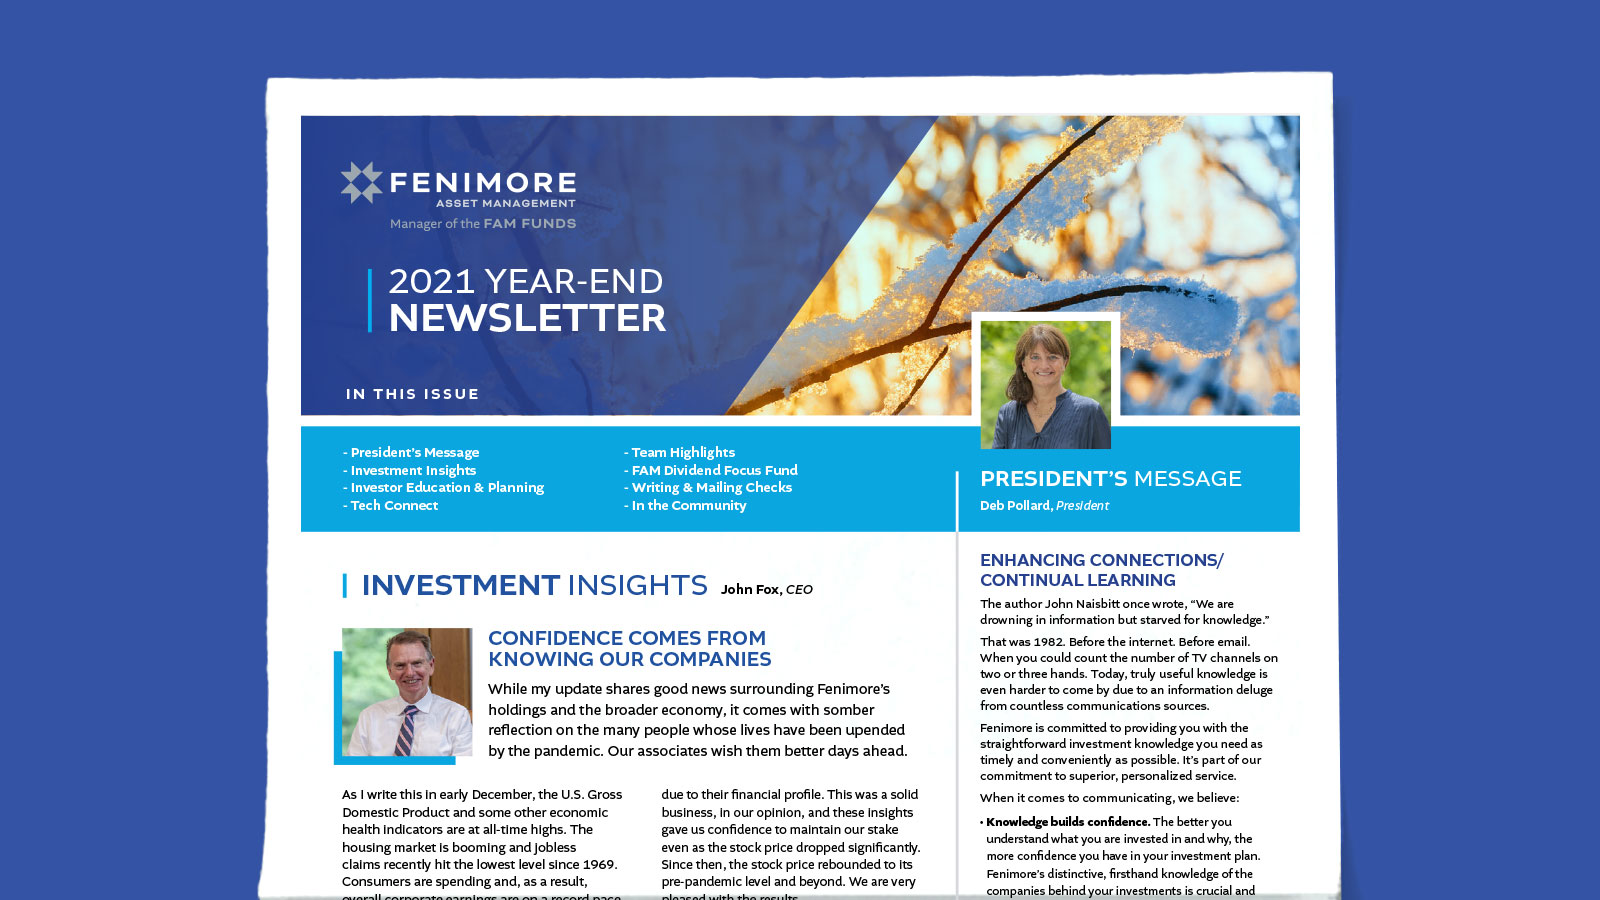 Fenimore’s 2021 Year-End Newsletter